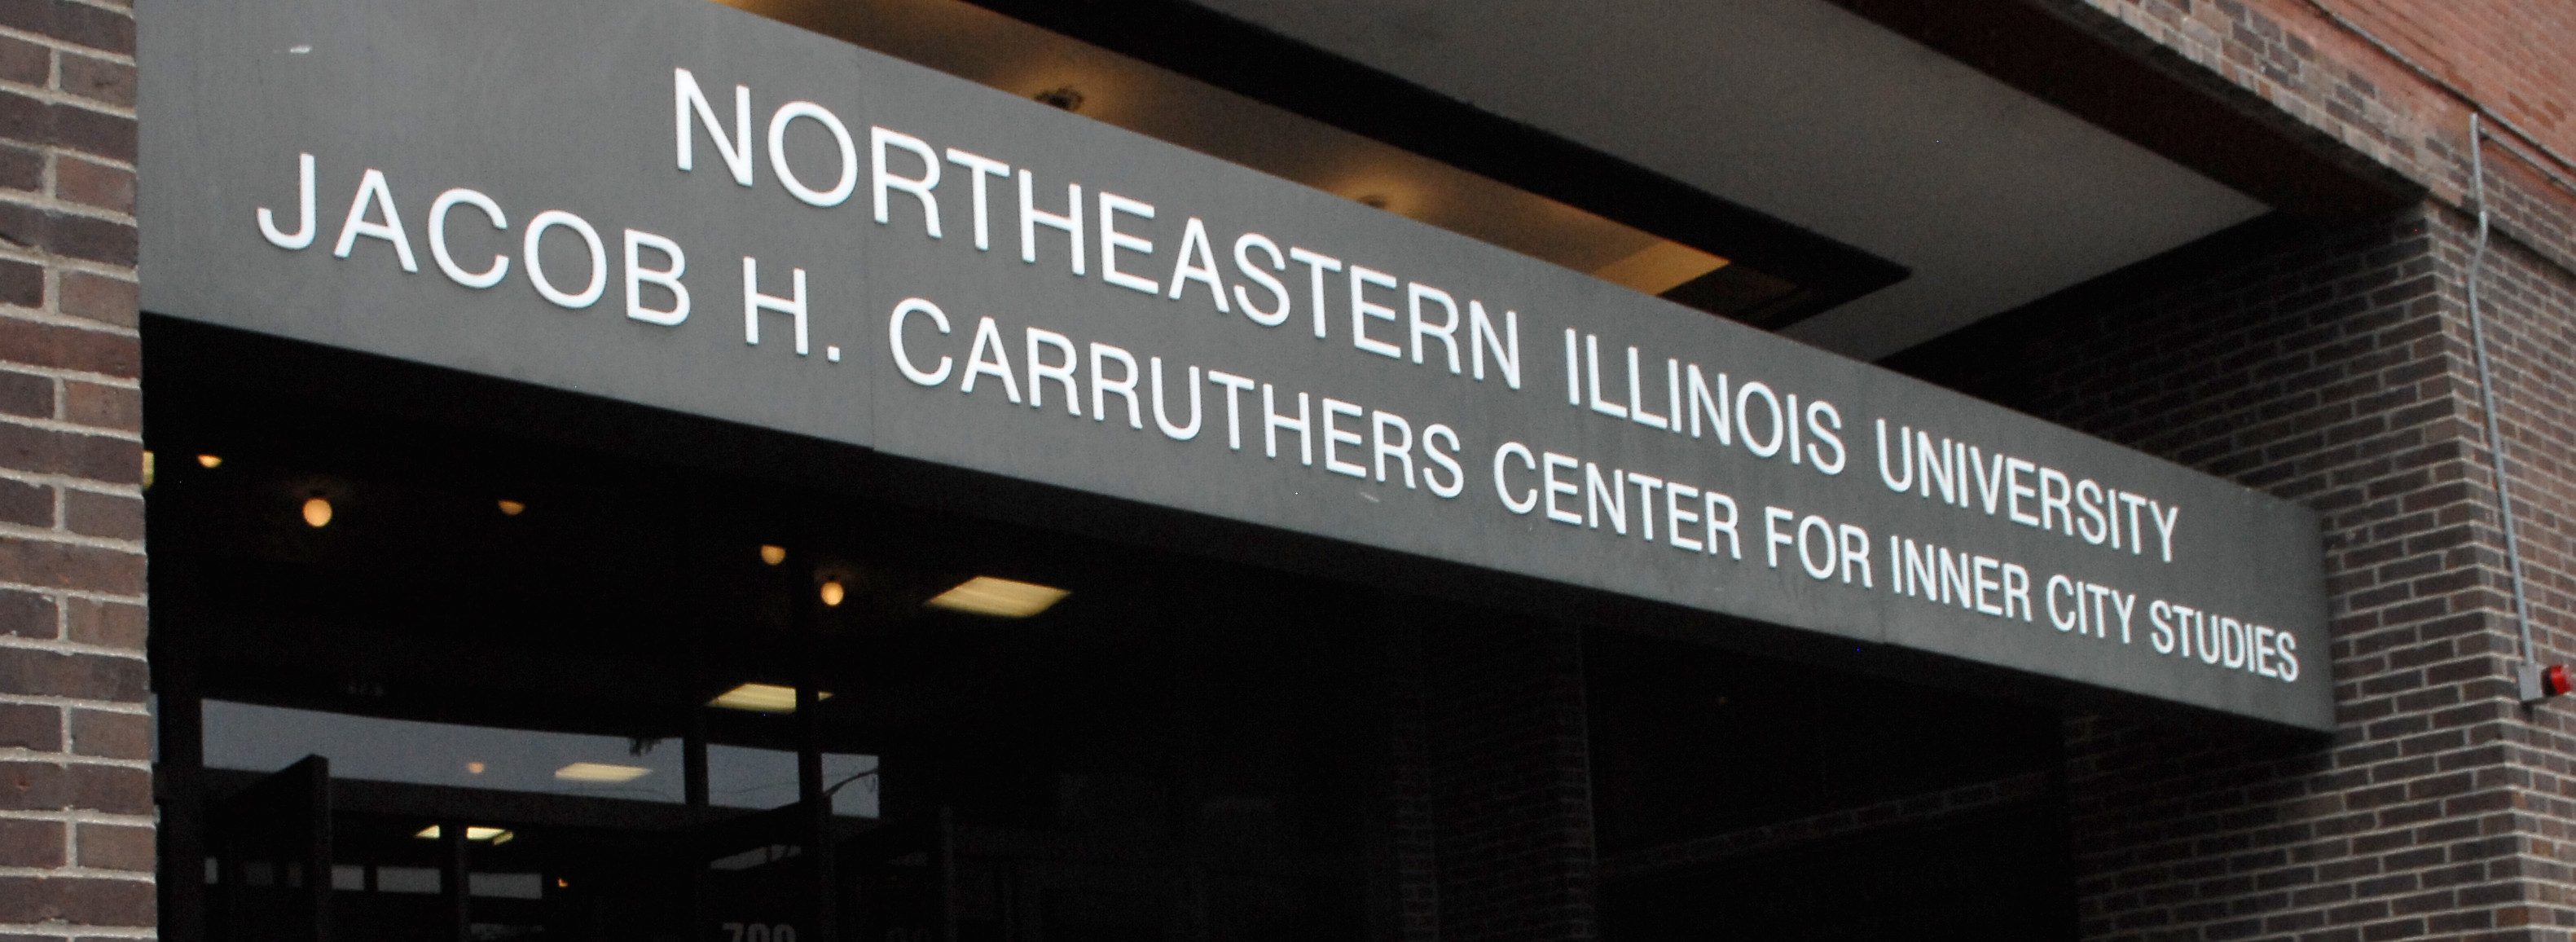 Carruthers Center